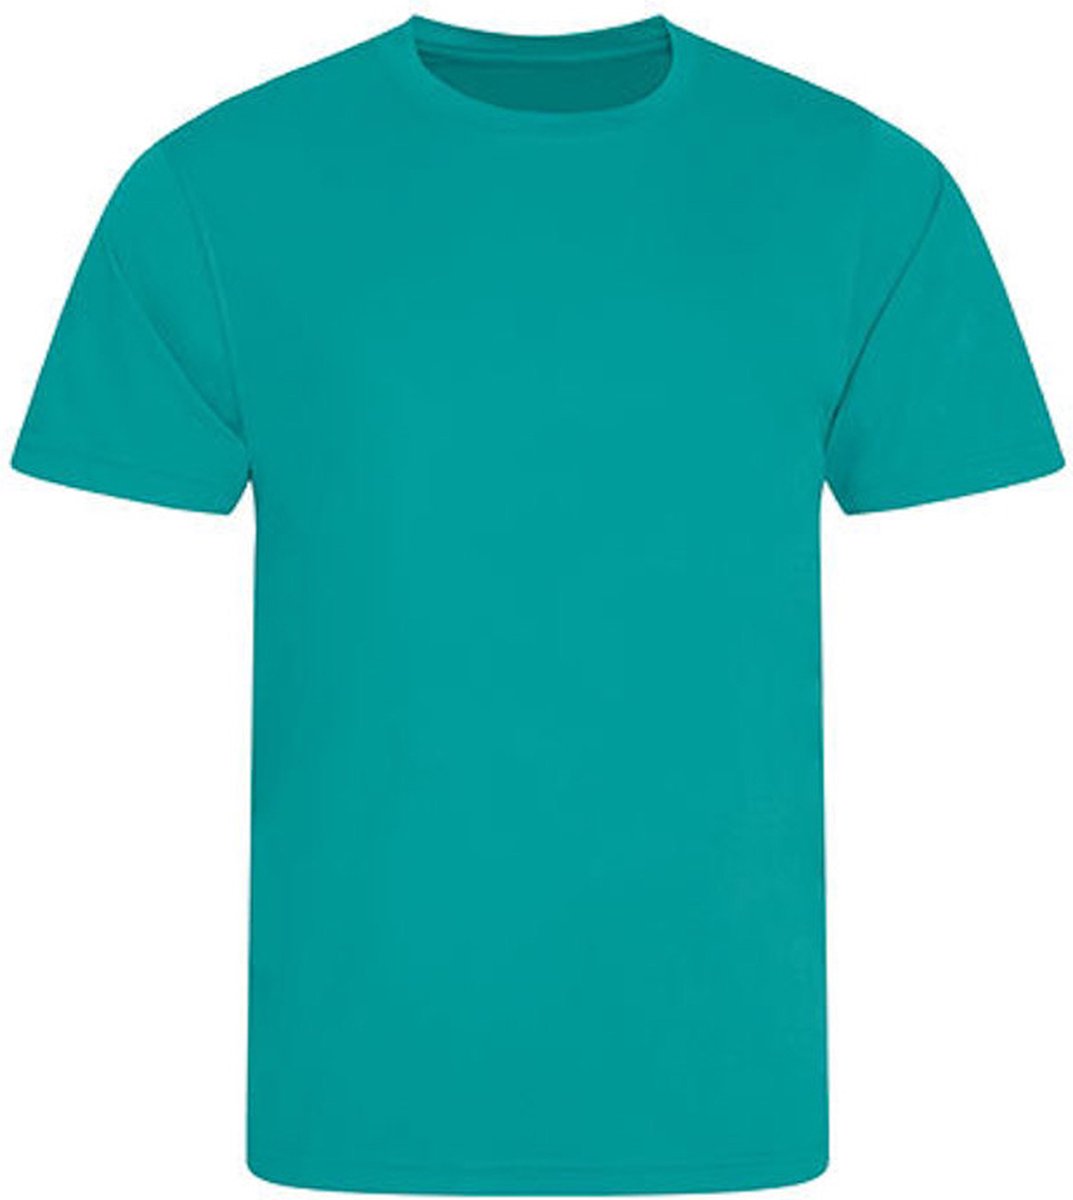 Herensportshirt 'Cool Smooth' Turquoise - L